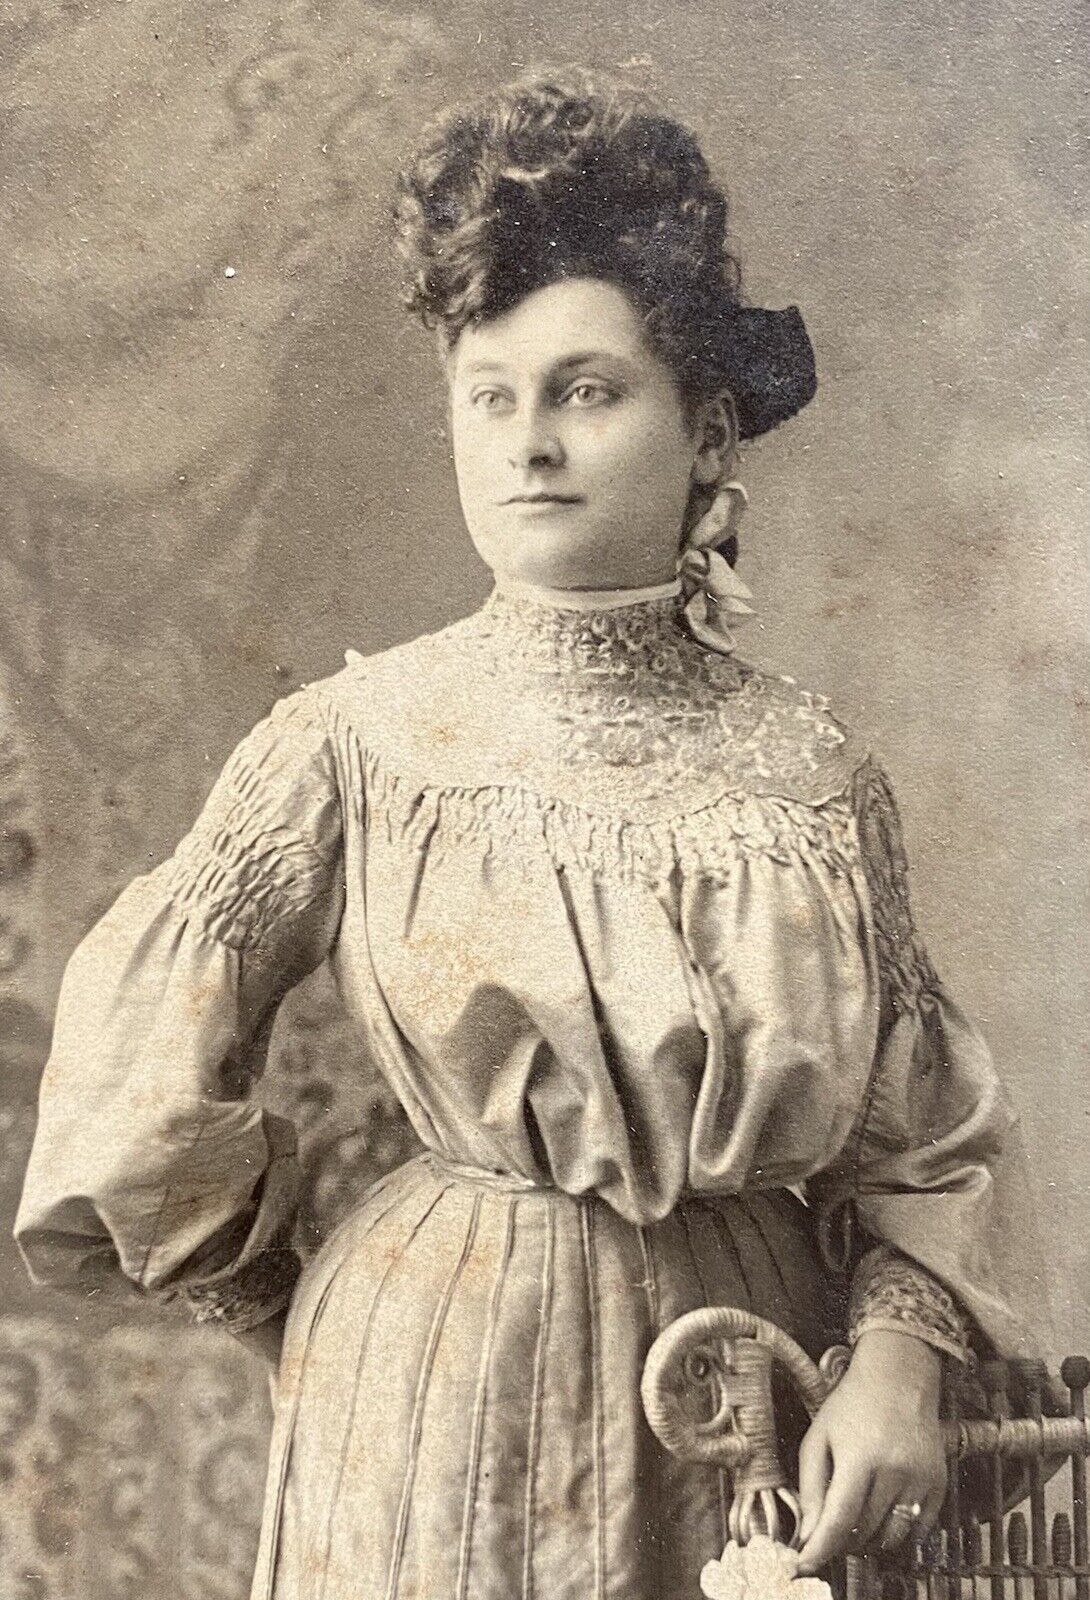 Chicago Pretty Young Woman with Big Hair Cabinet Card Antique Vintage Photo